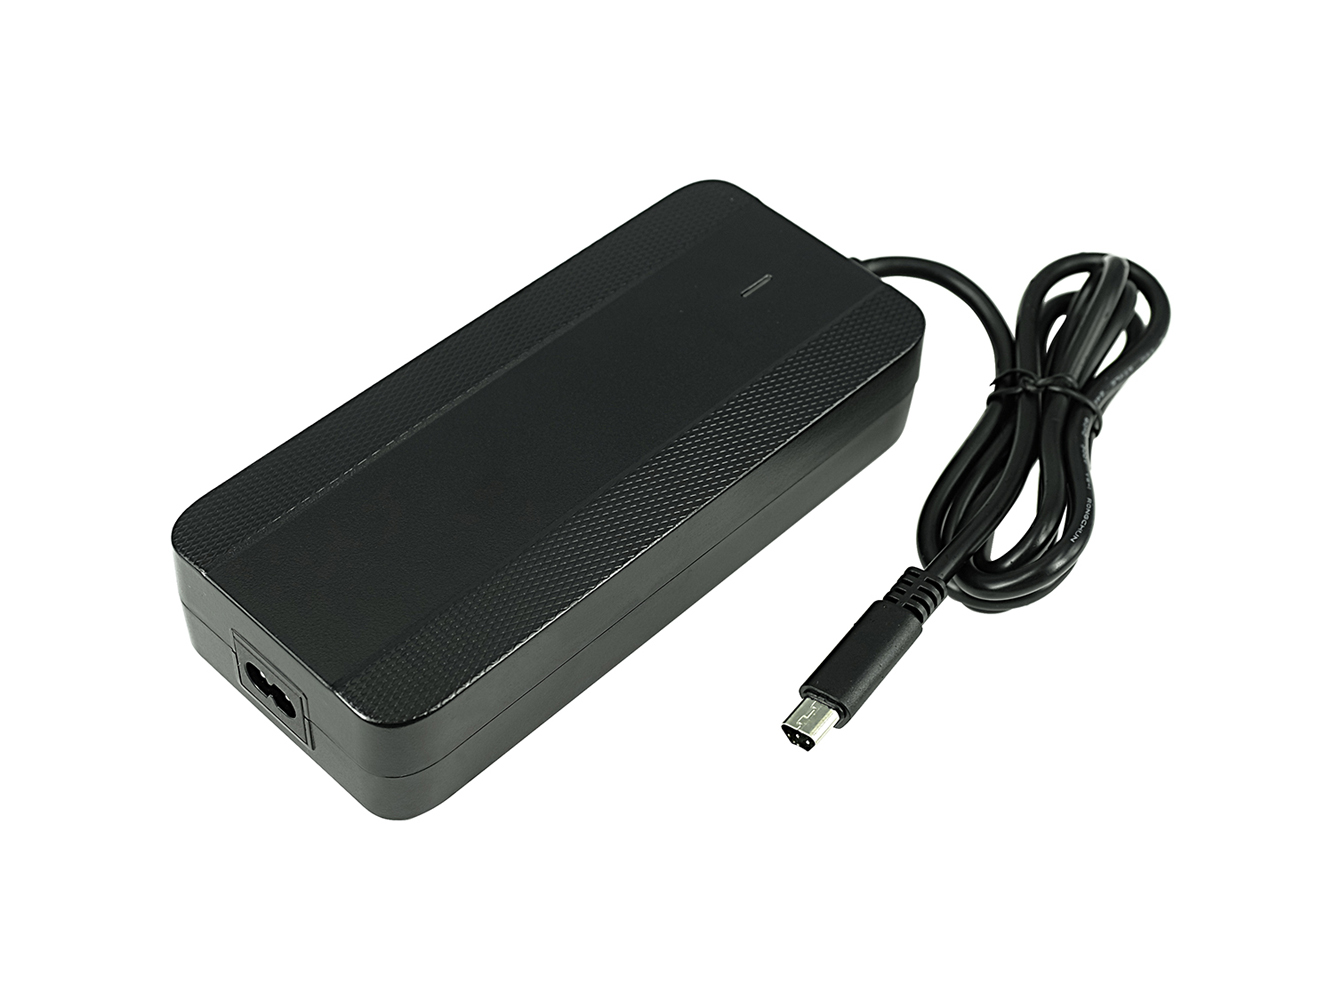 36V 4A AC Adapter Charger For Electric Bike (Not compatible to Joycube / Phylion batteries)